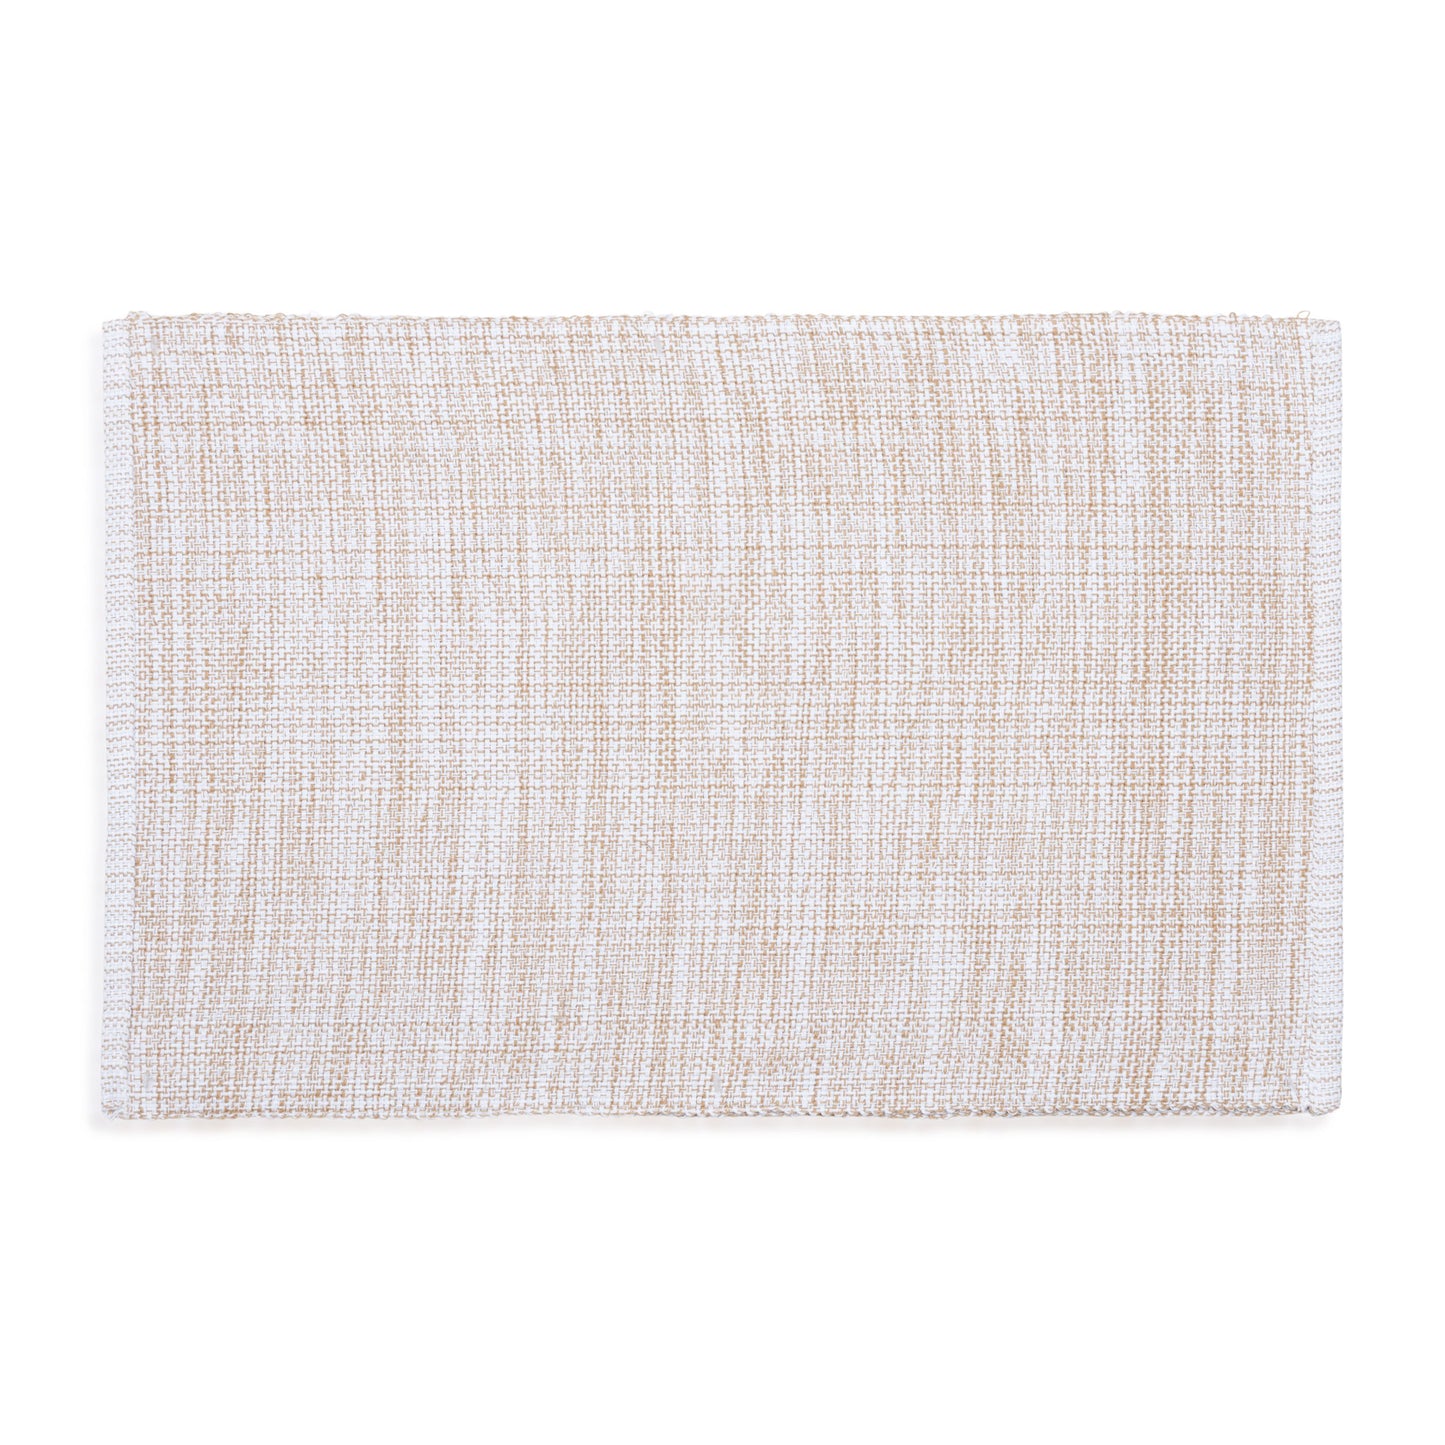 Tan Textured Woven Dining Room Table Placemat